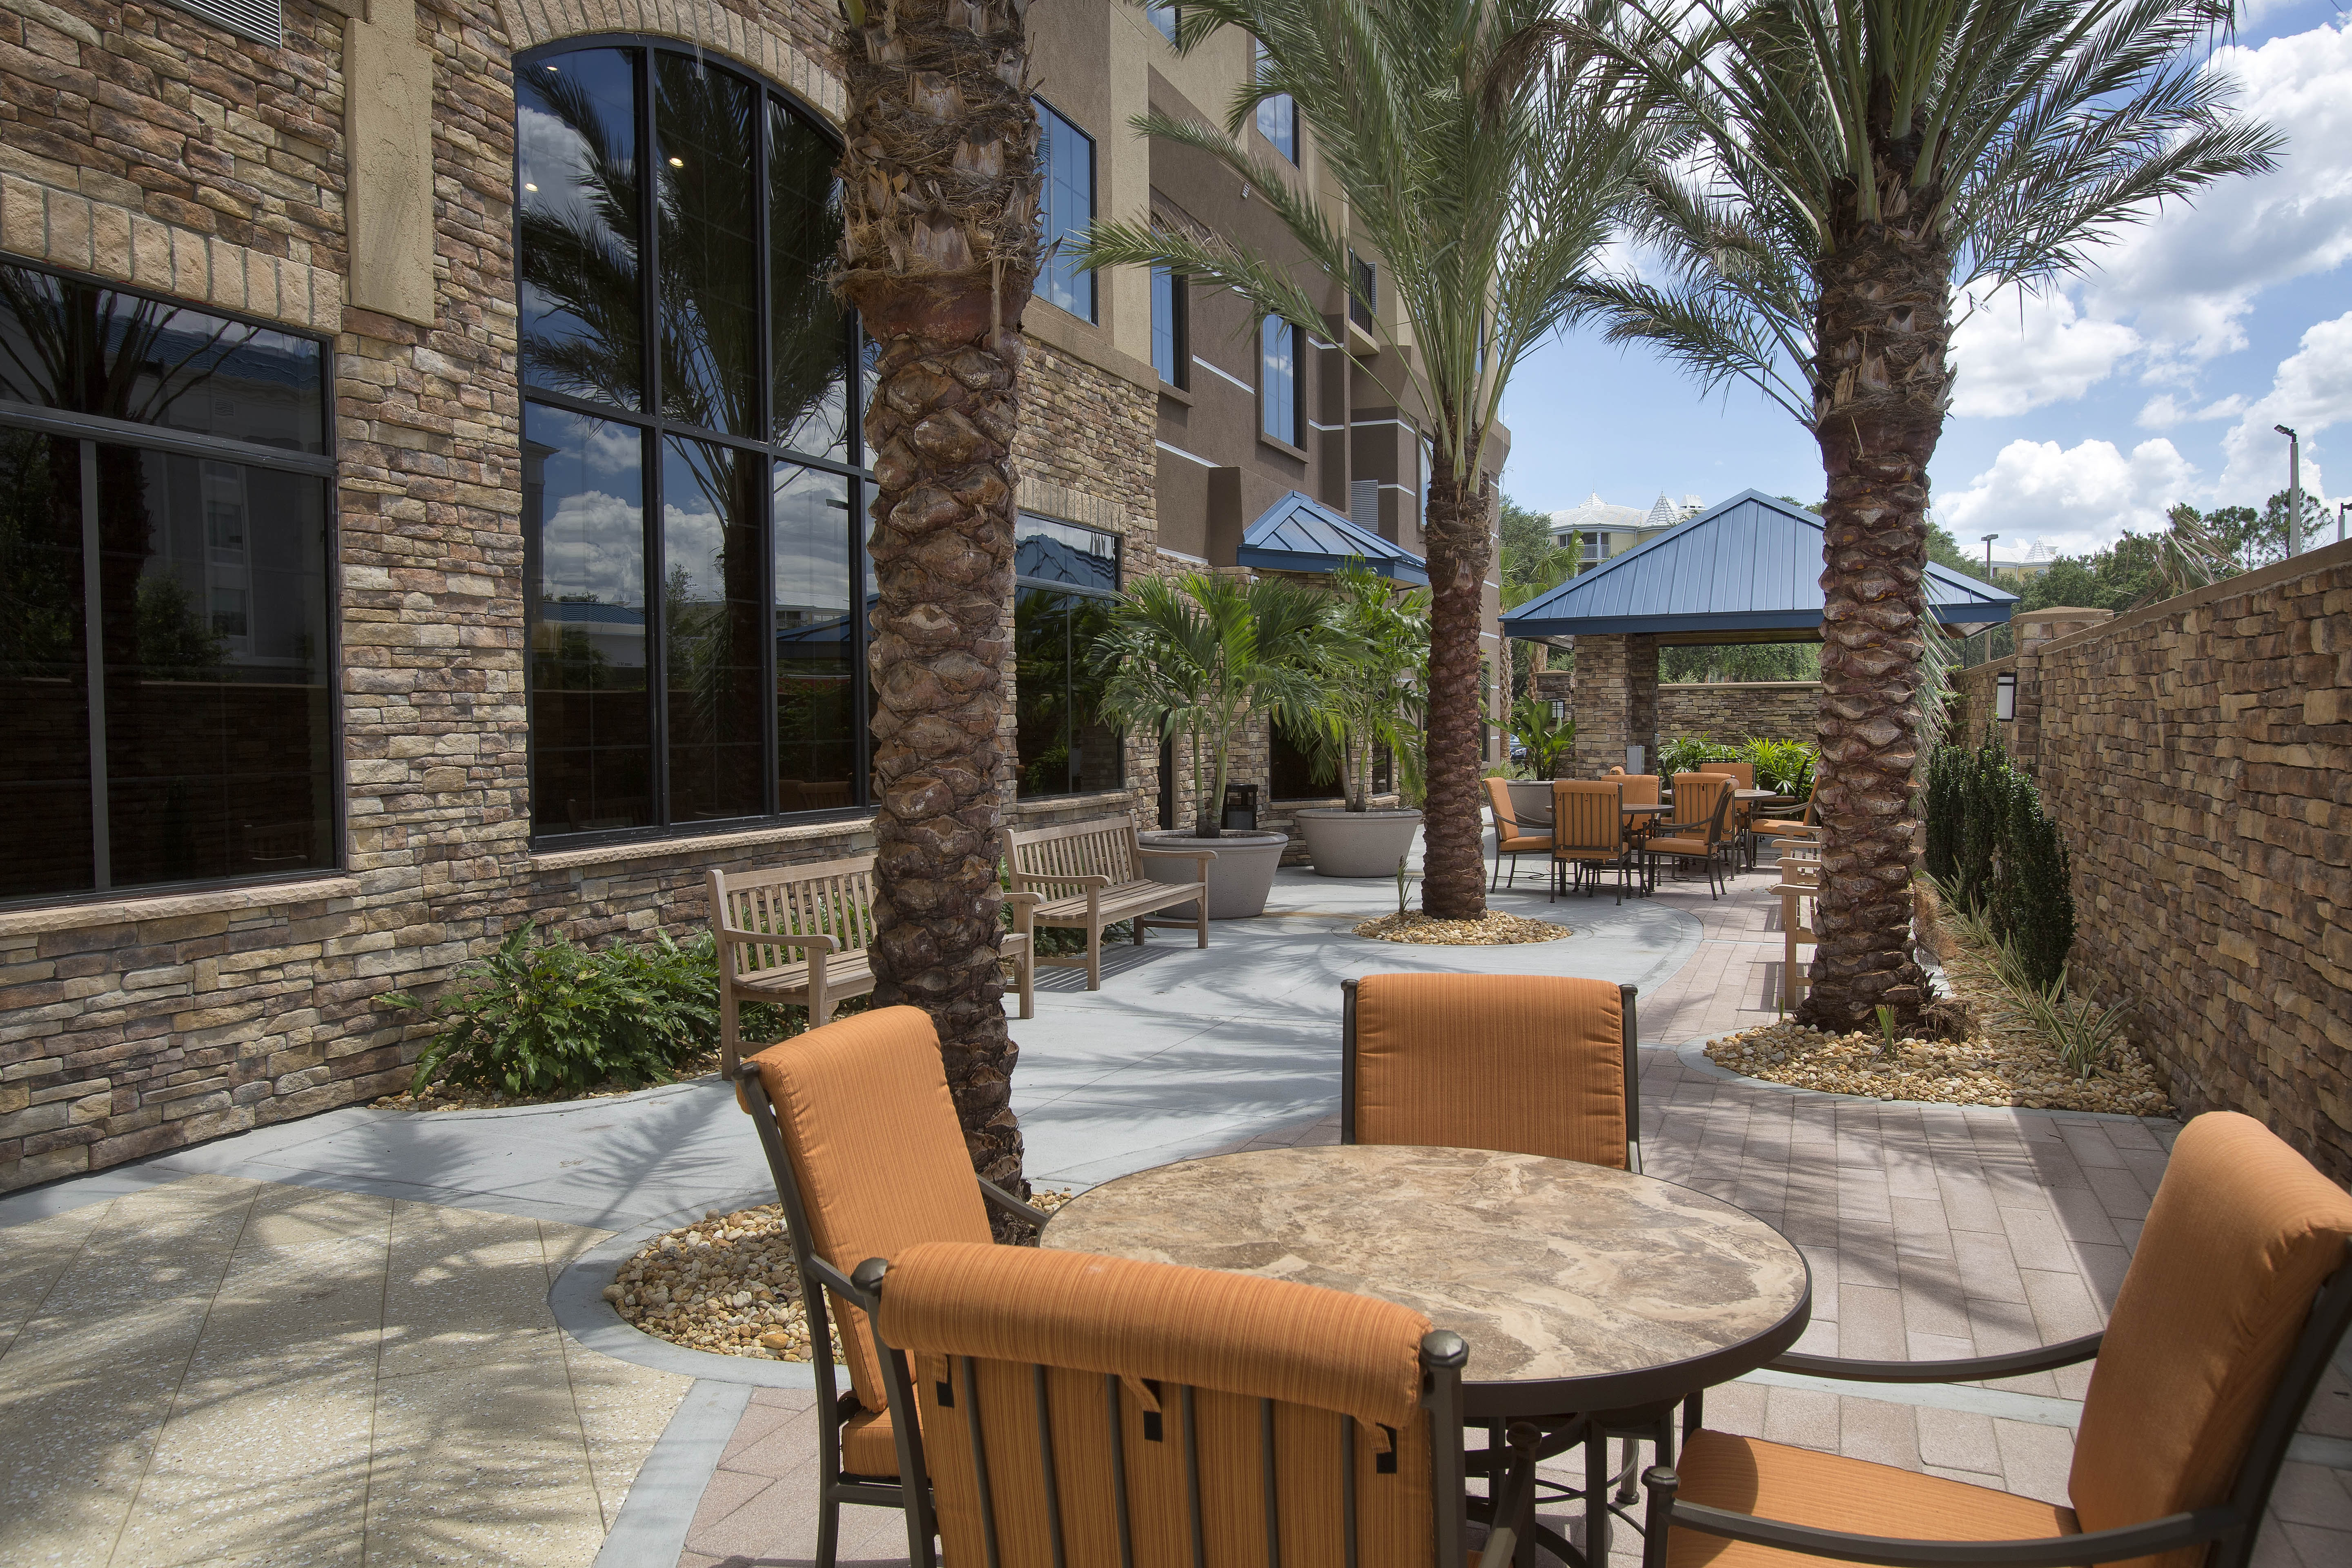 Our Courtyard/Patio area features a gazebo, seating, & bbq grills.